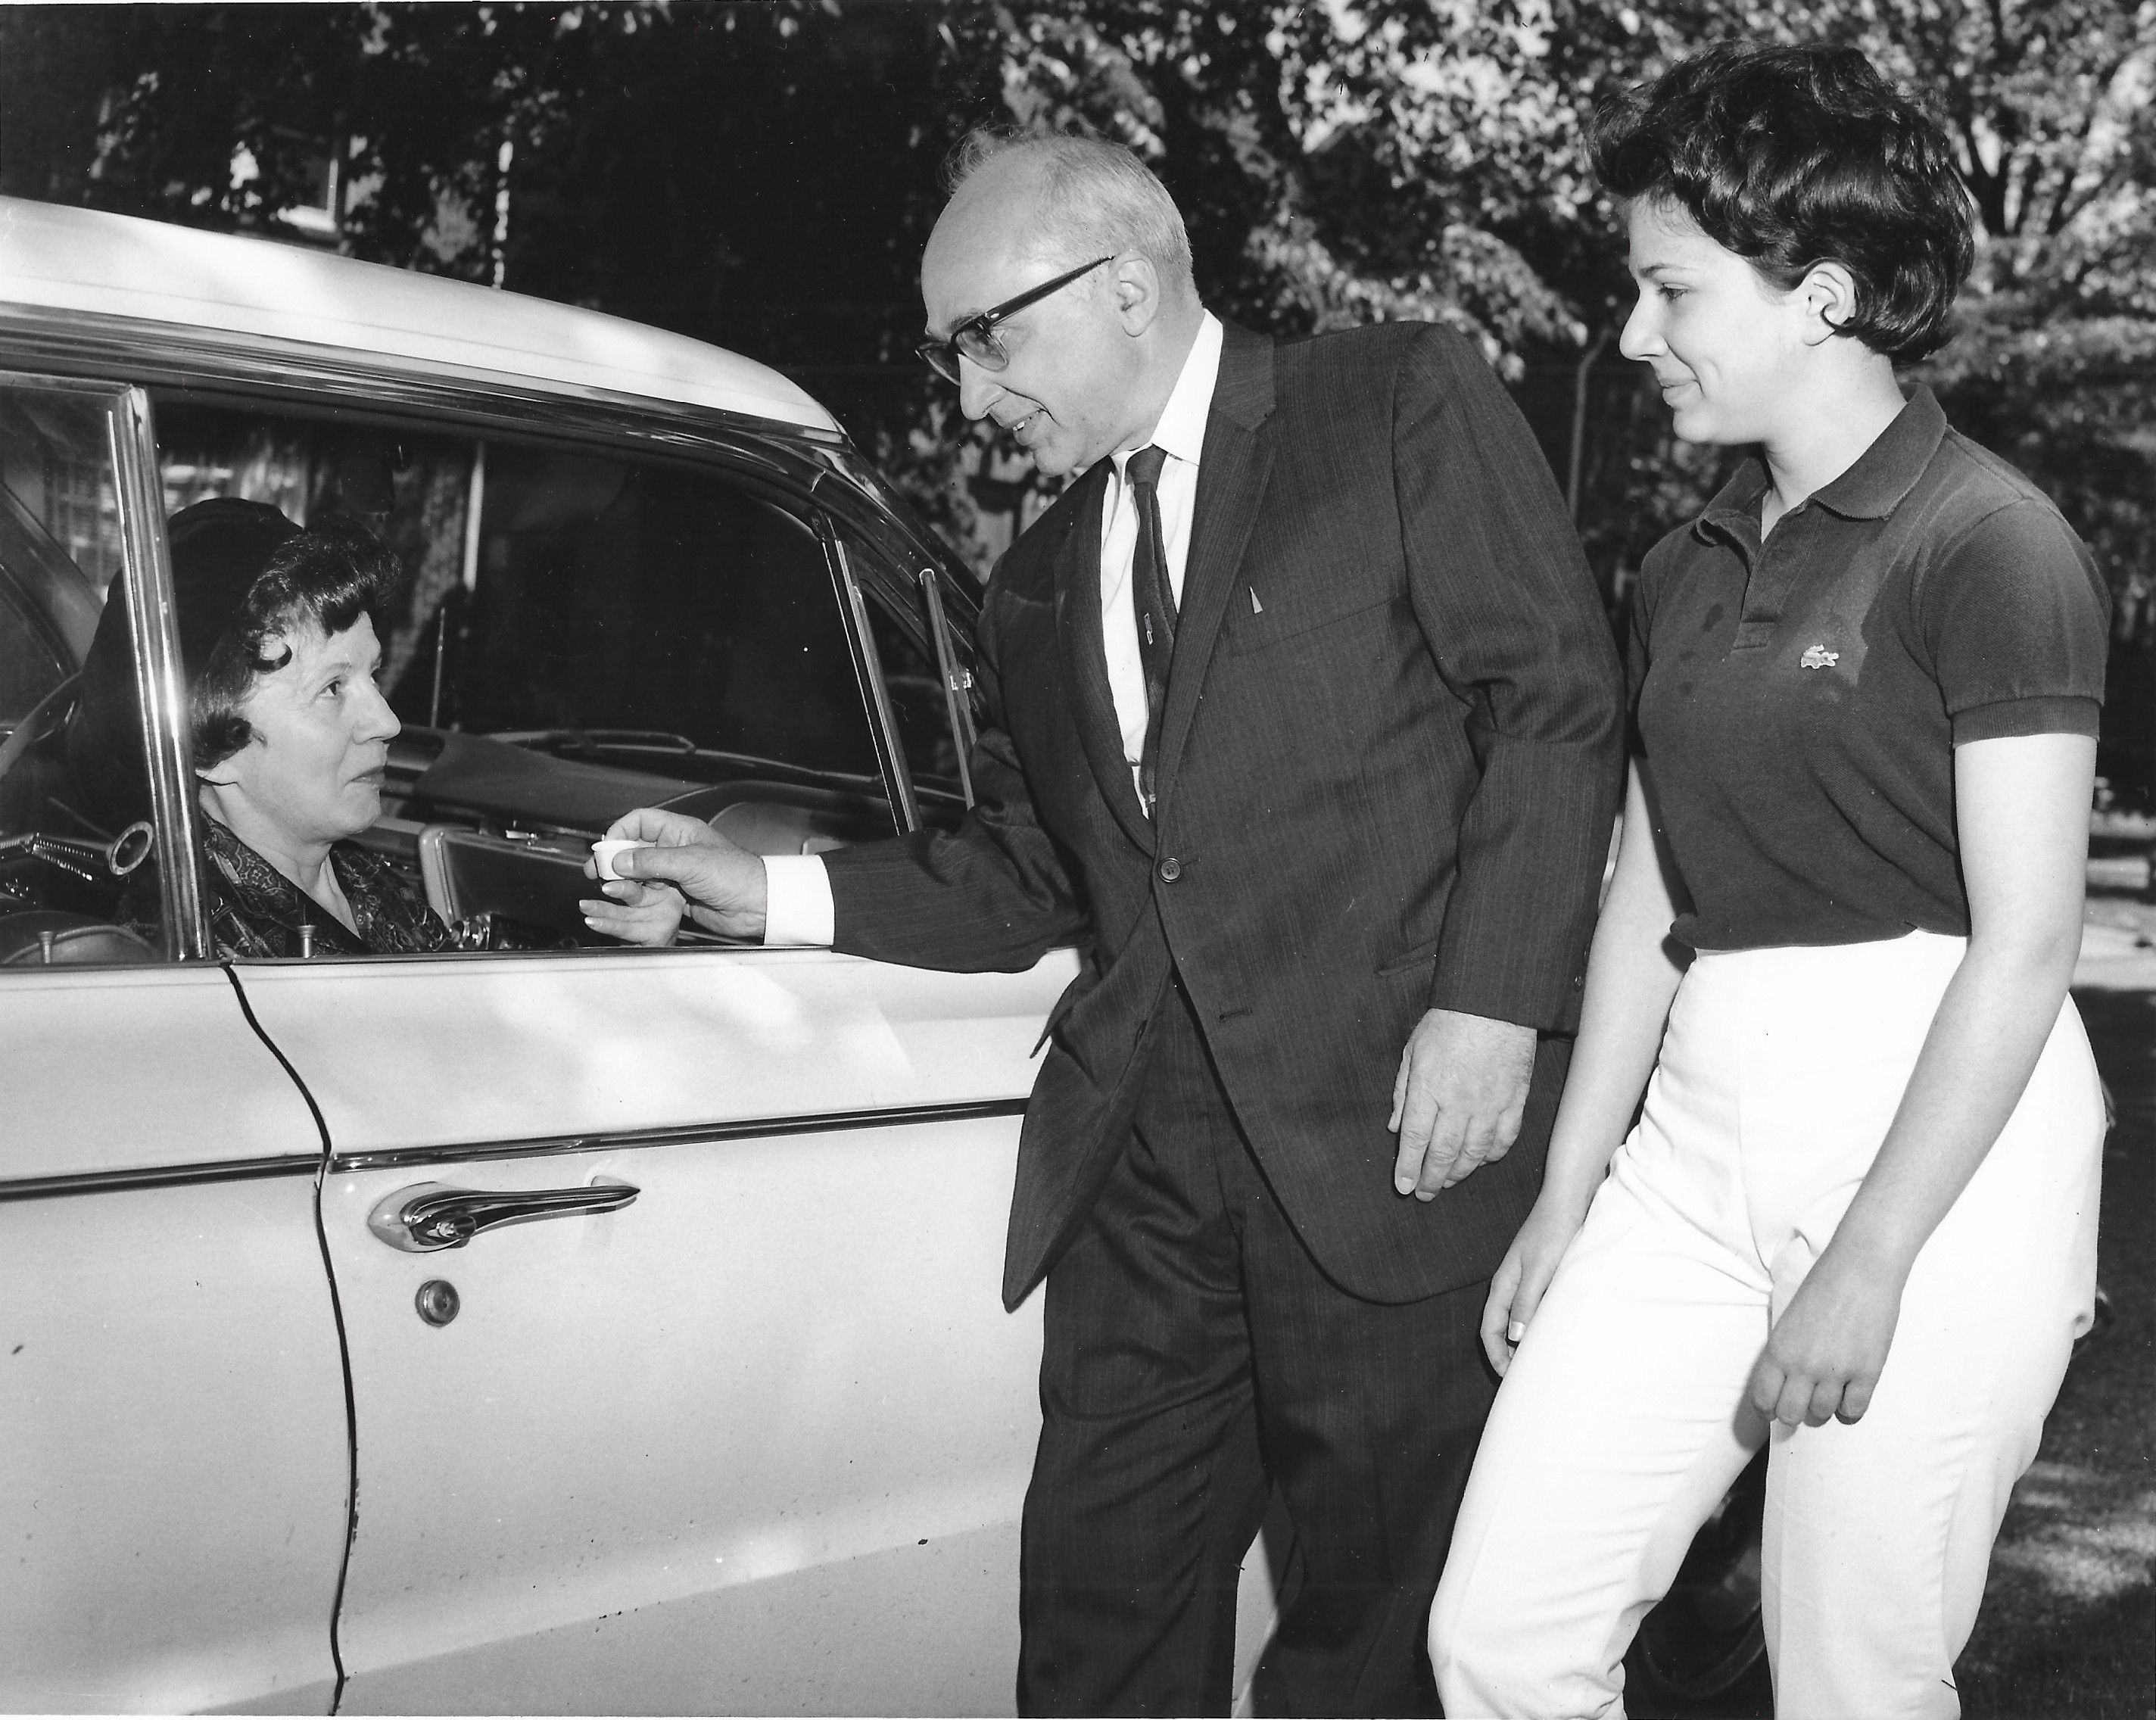 Mrs. Lester Farber receives her vaccine through the drive thru for handicapped patients.